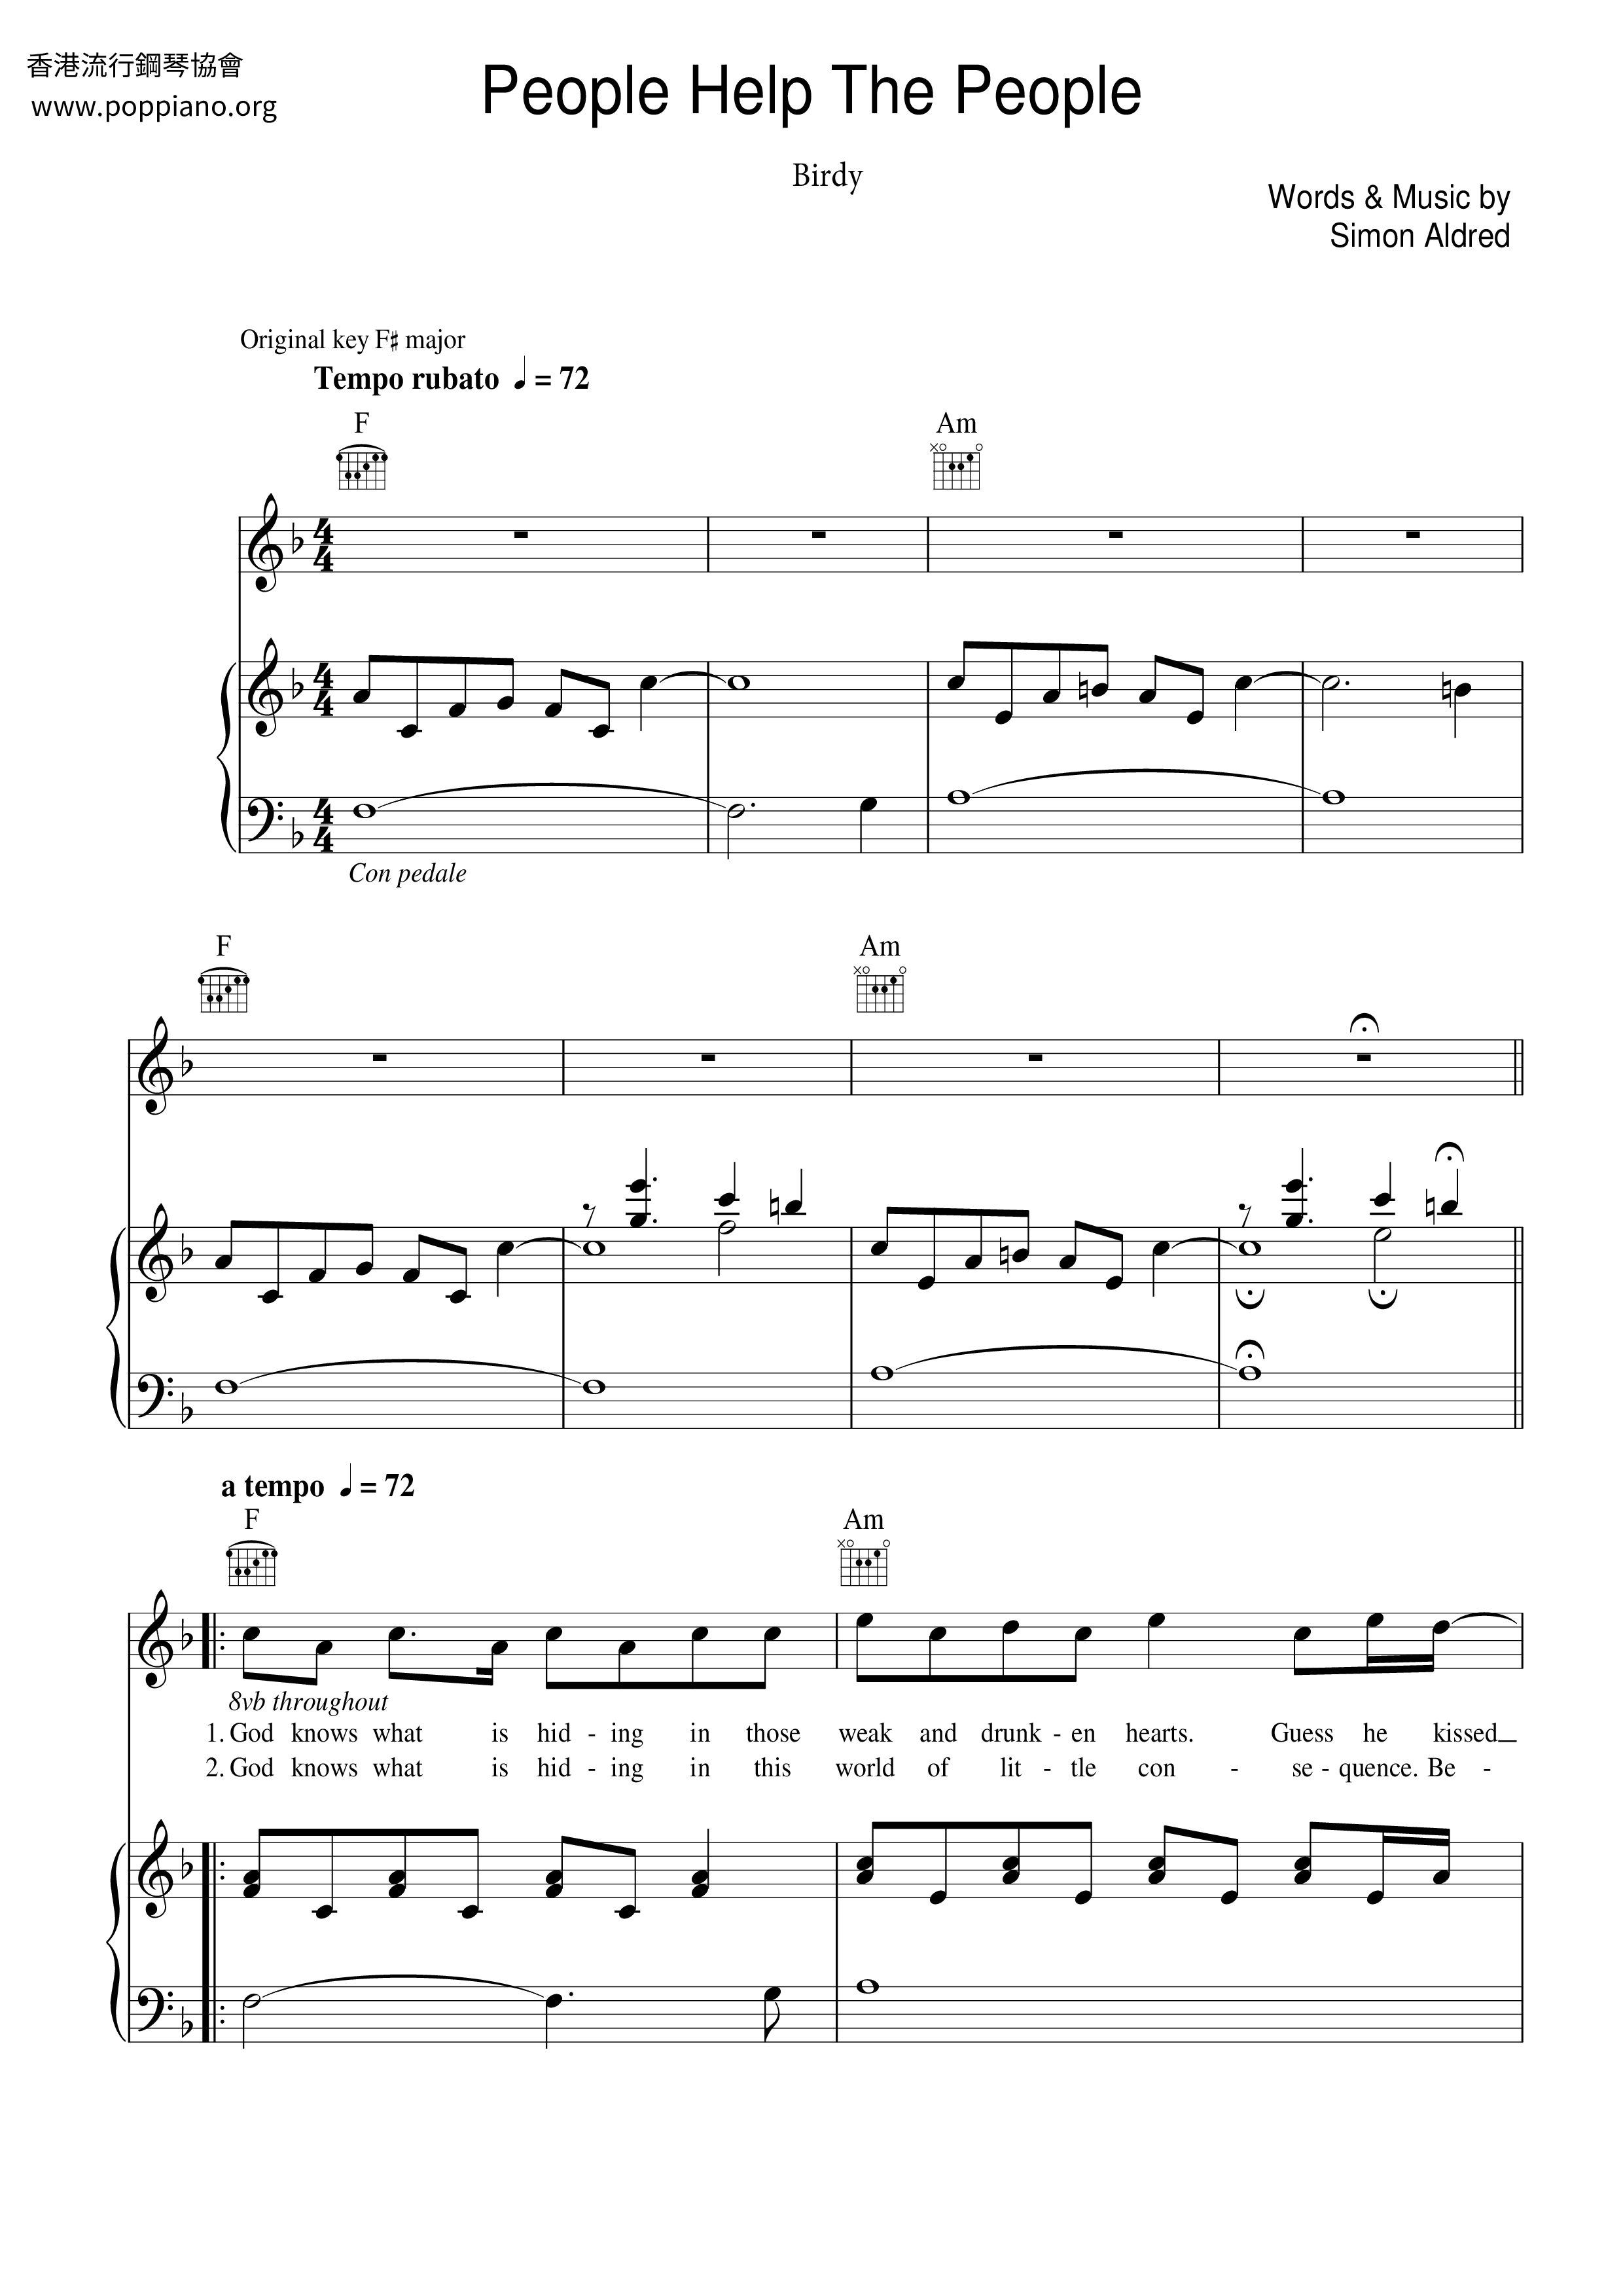 ☆ Help The People Music pdf, Free Score Download ☆